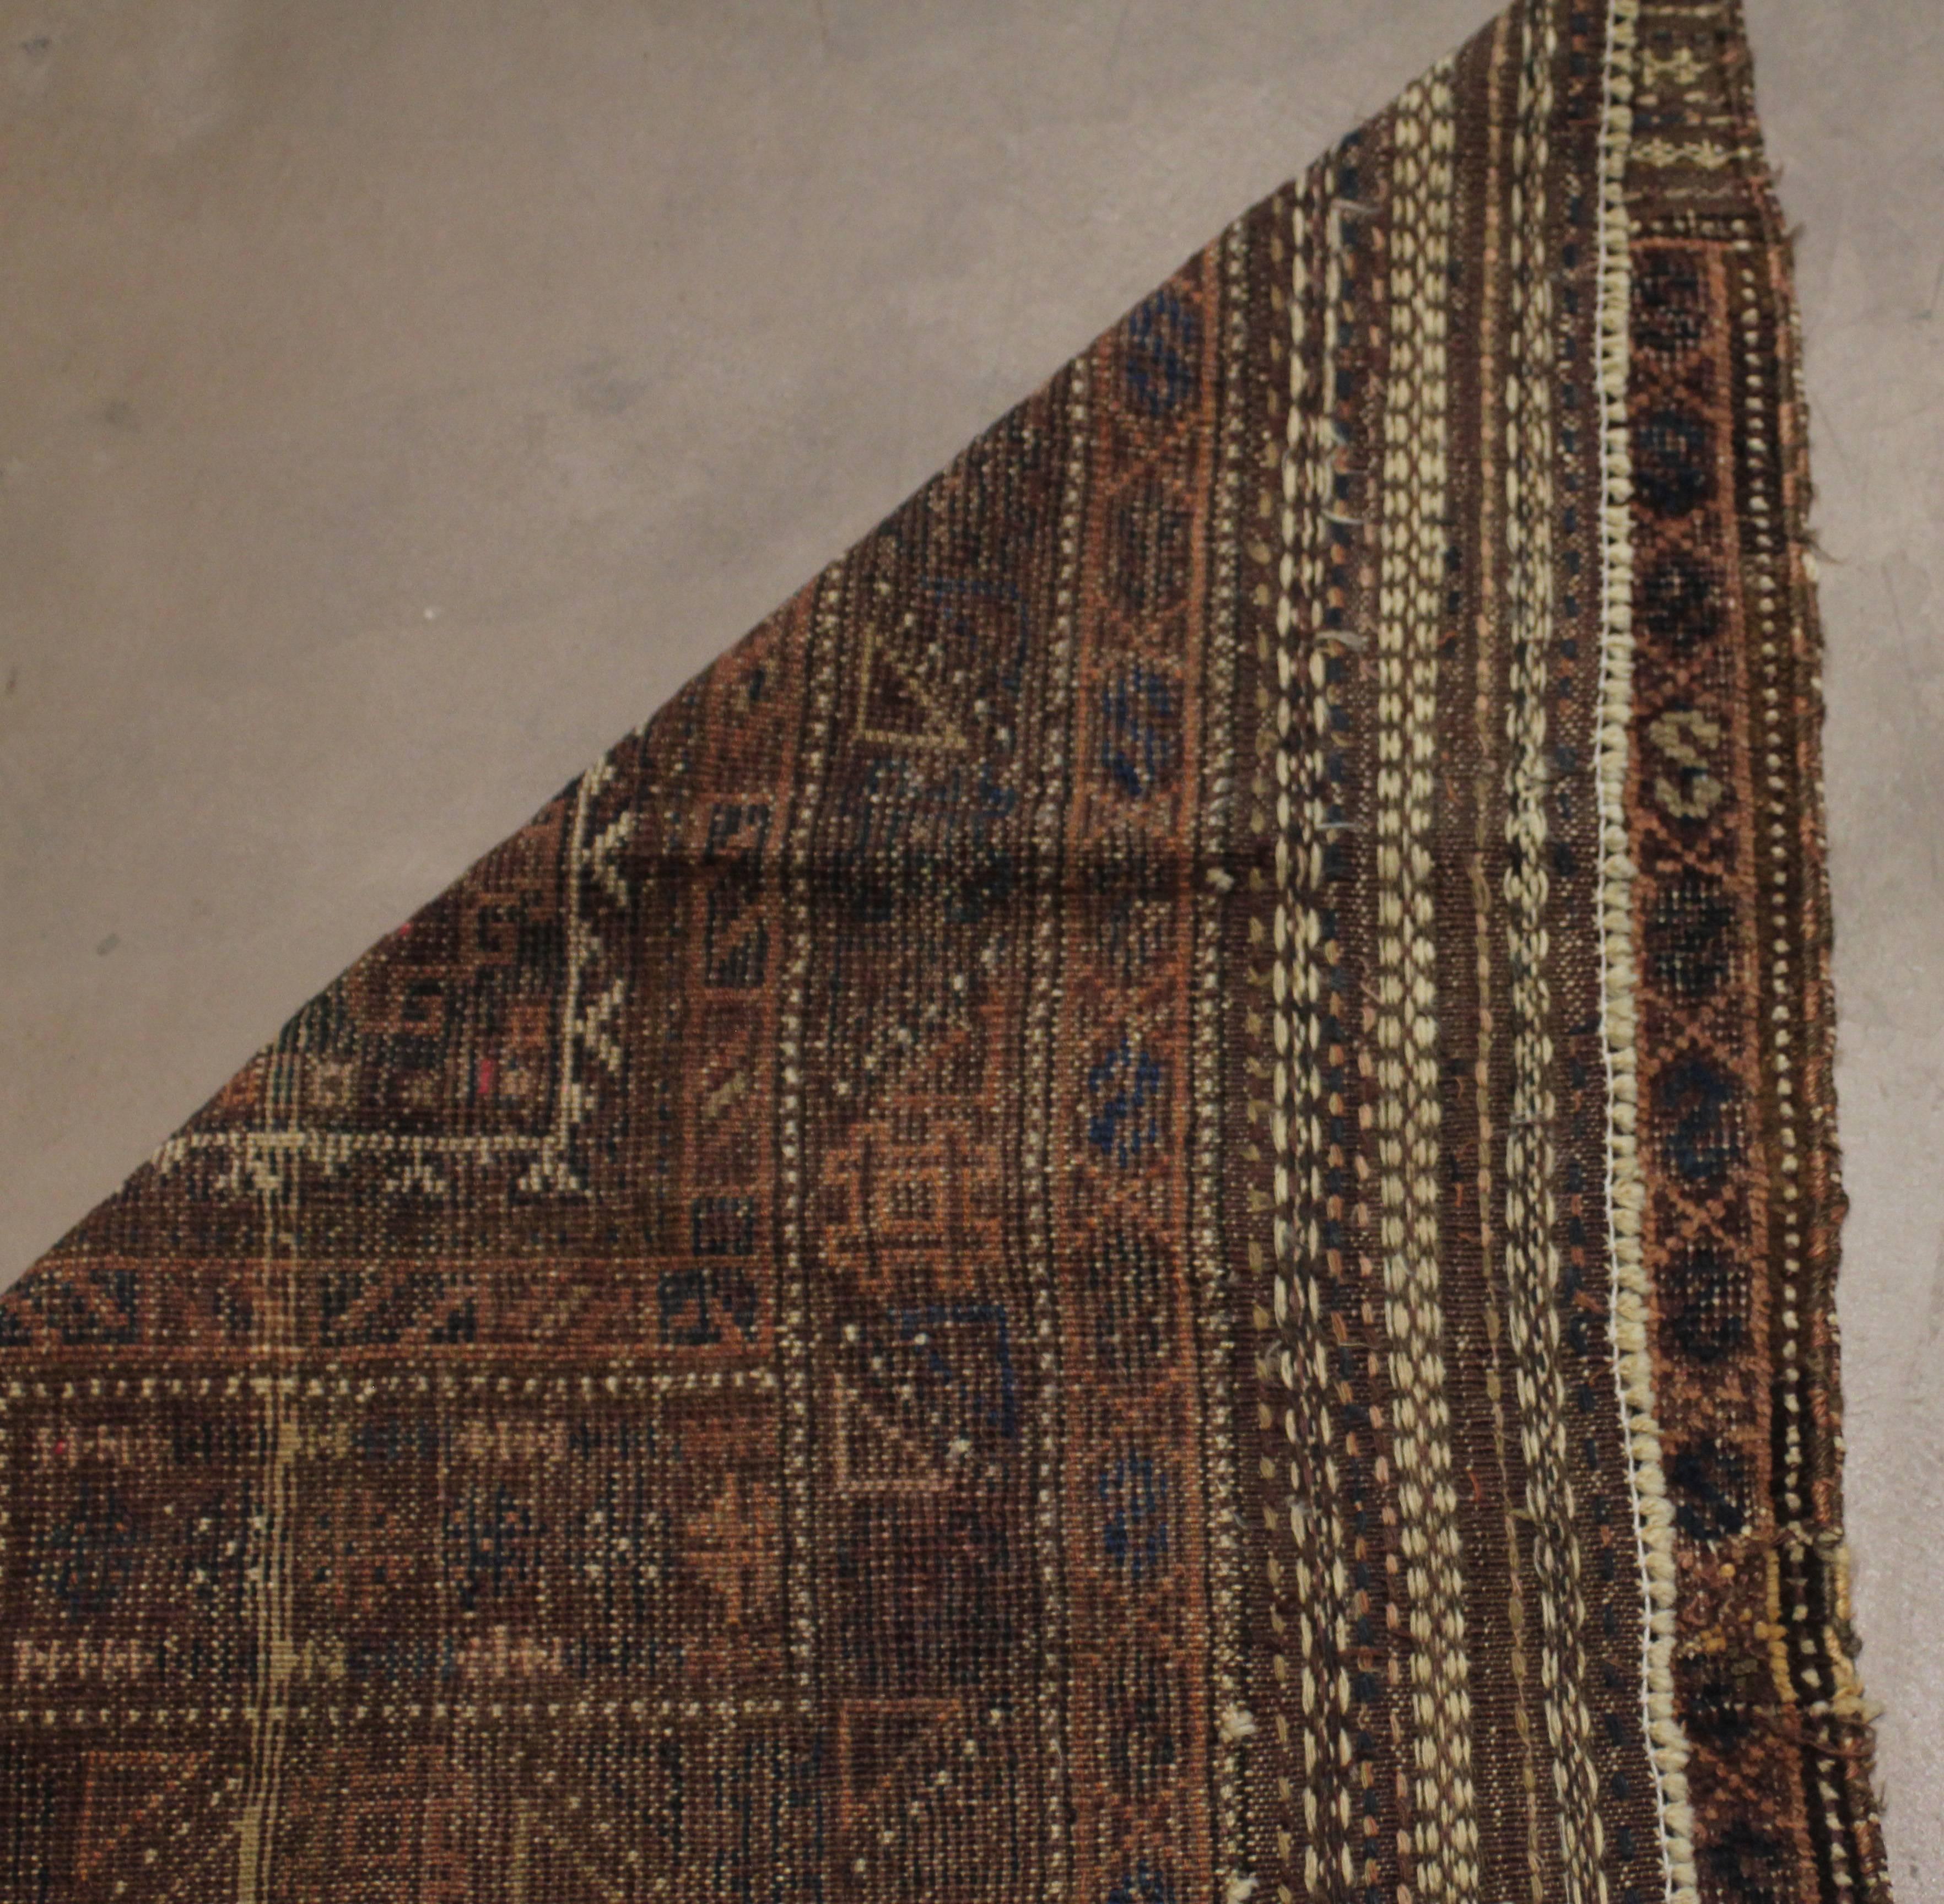 Hand-Woven Early 20th Century, Handwoven Baluch Rug from Western Afganistan